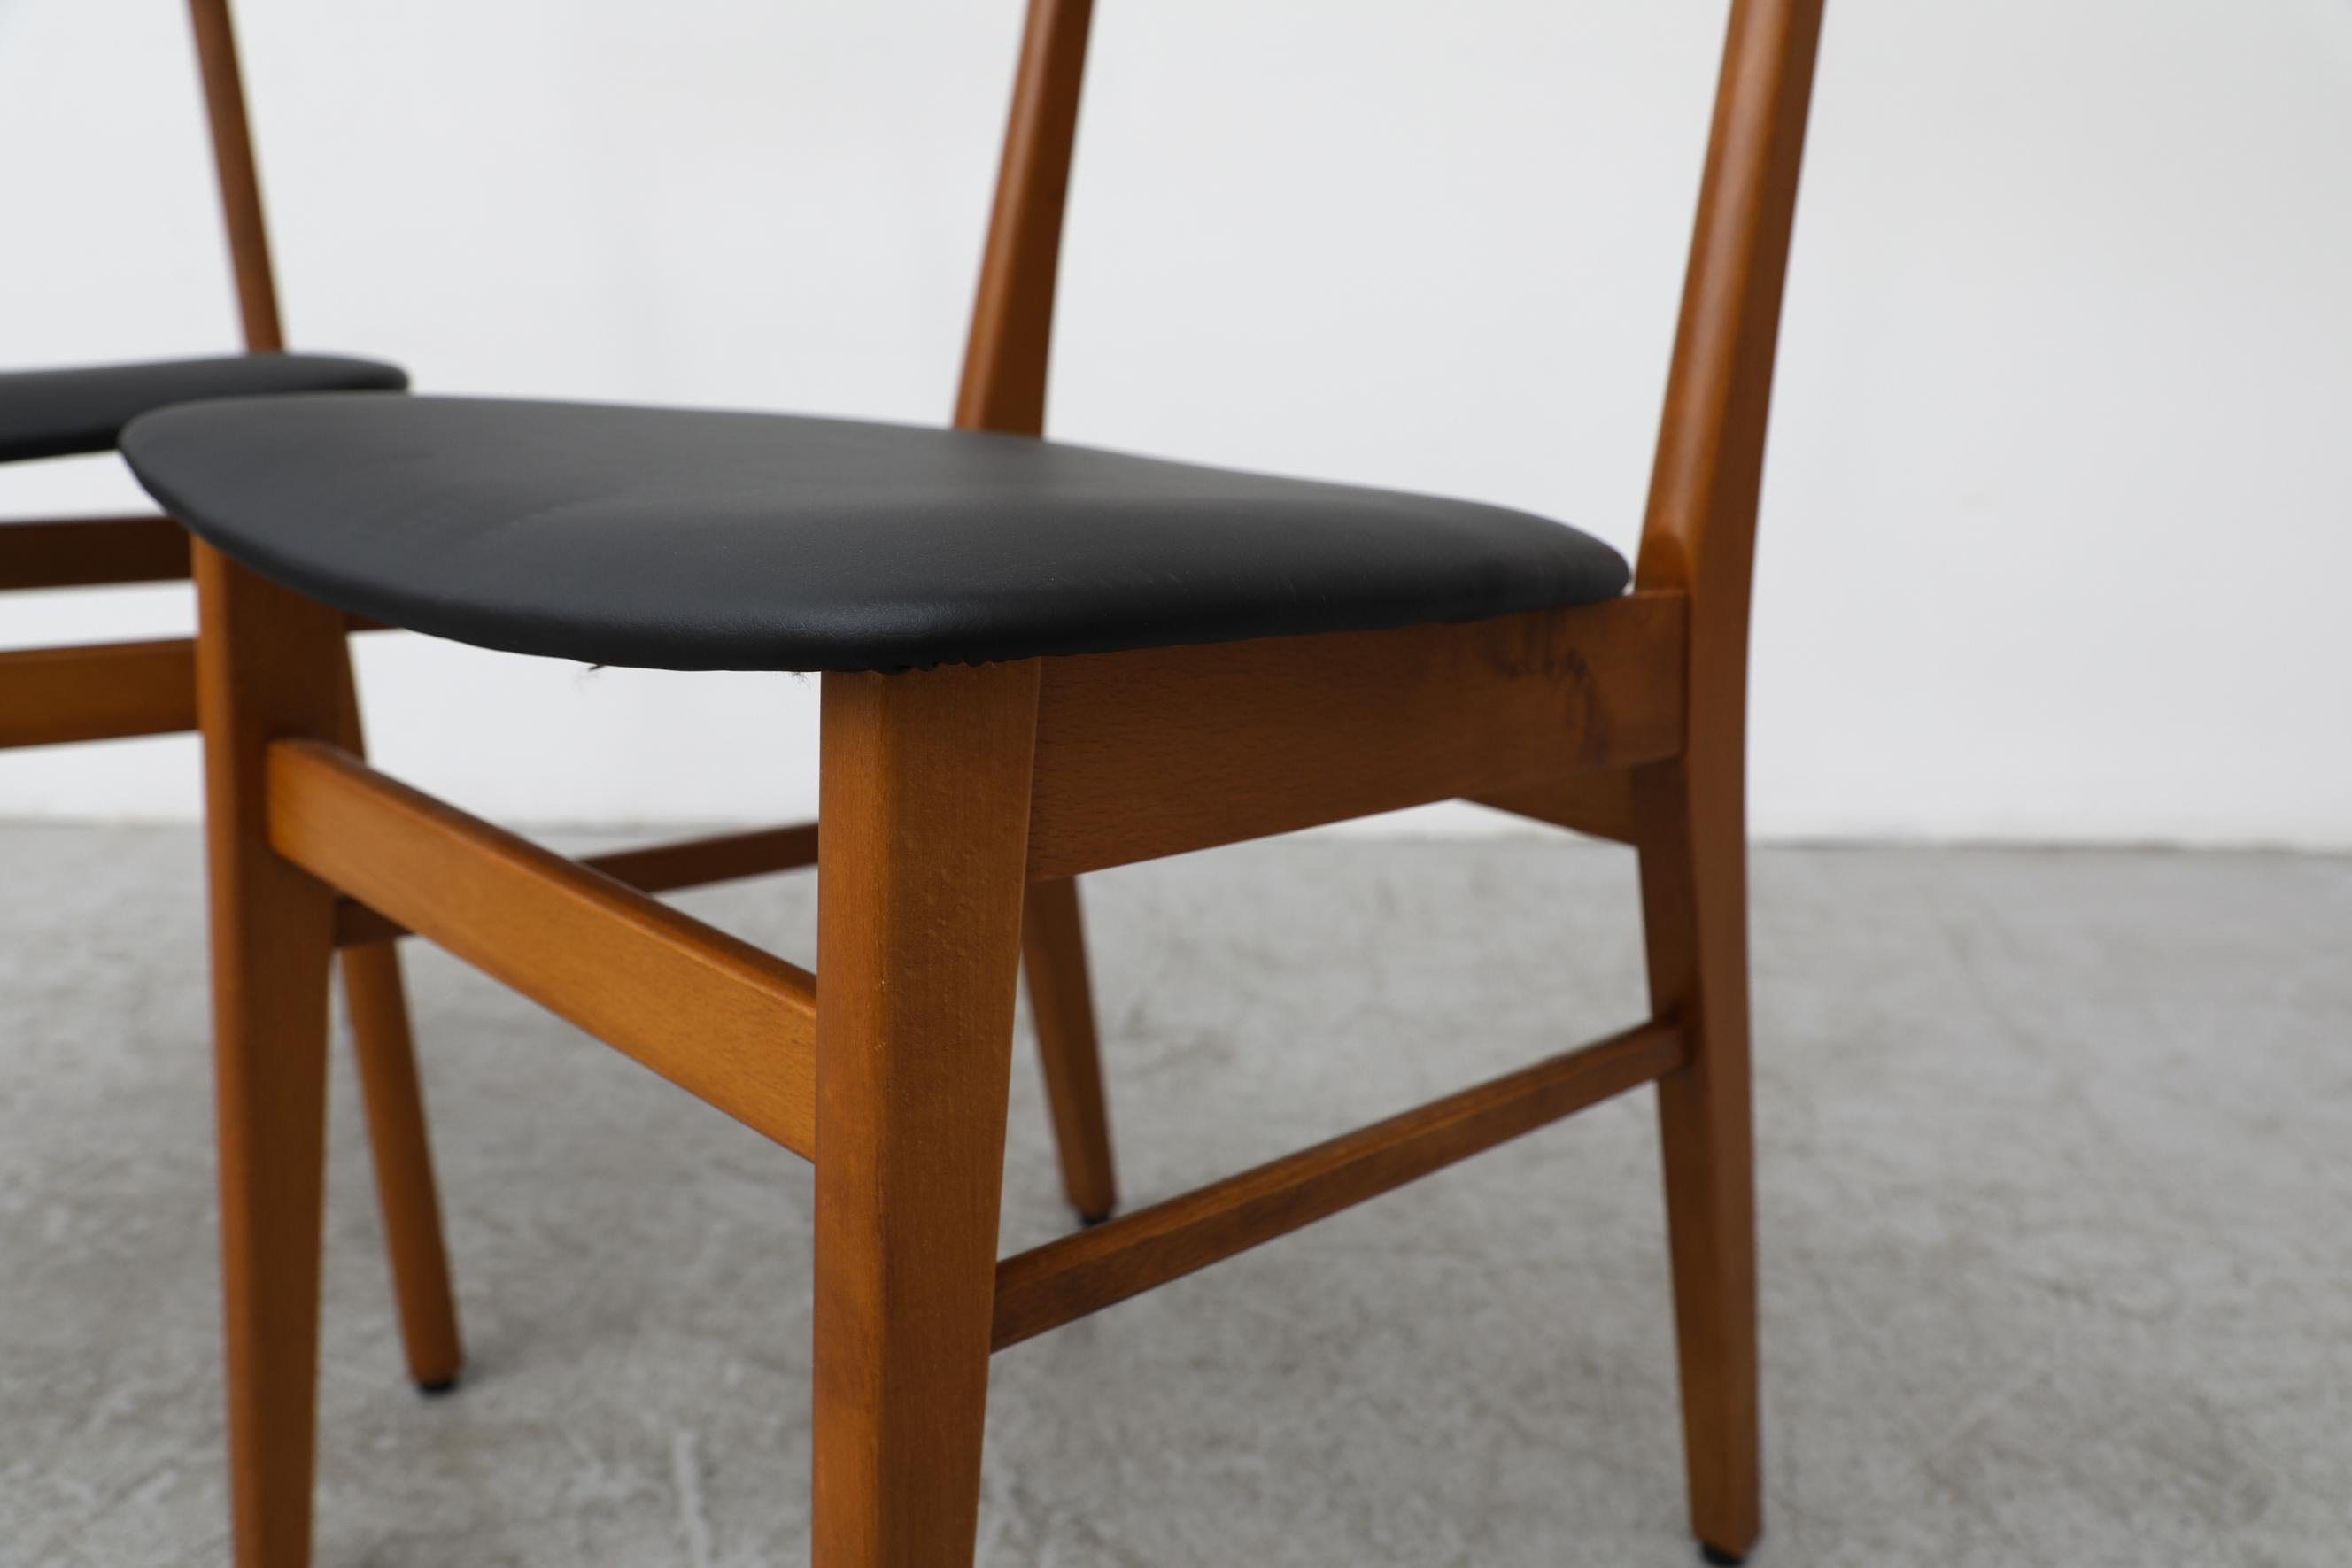 Pair of Borge Mogensen Style Danish Chairs by Farstrup with Black Skai Seats For Sale 7